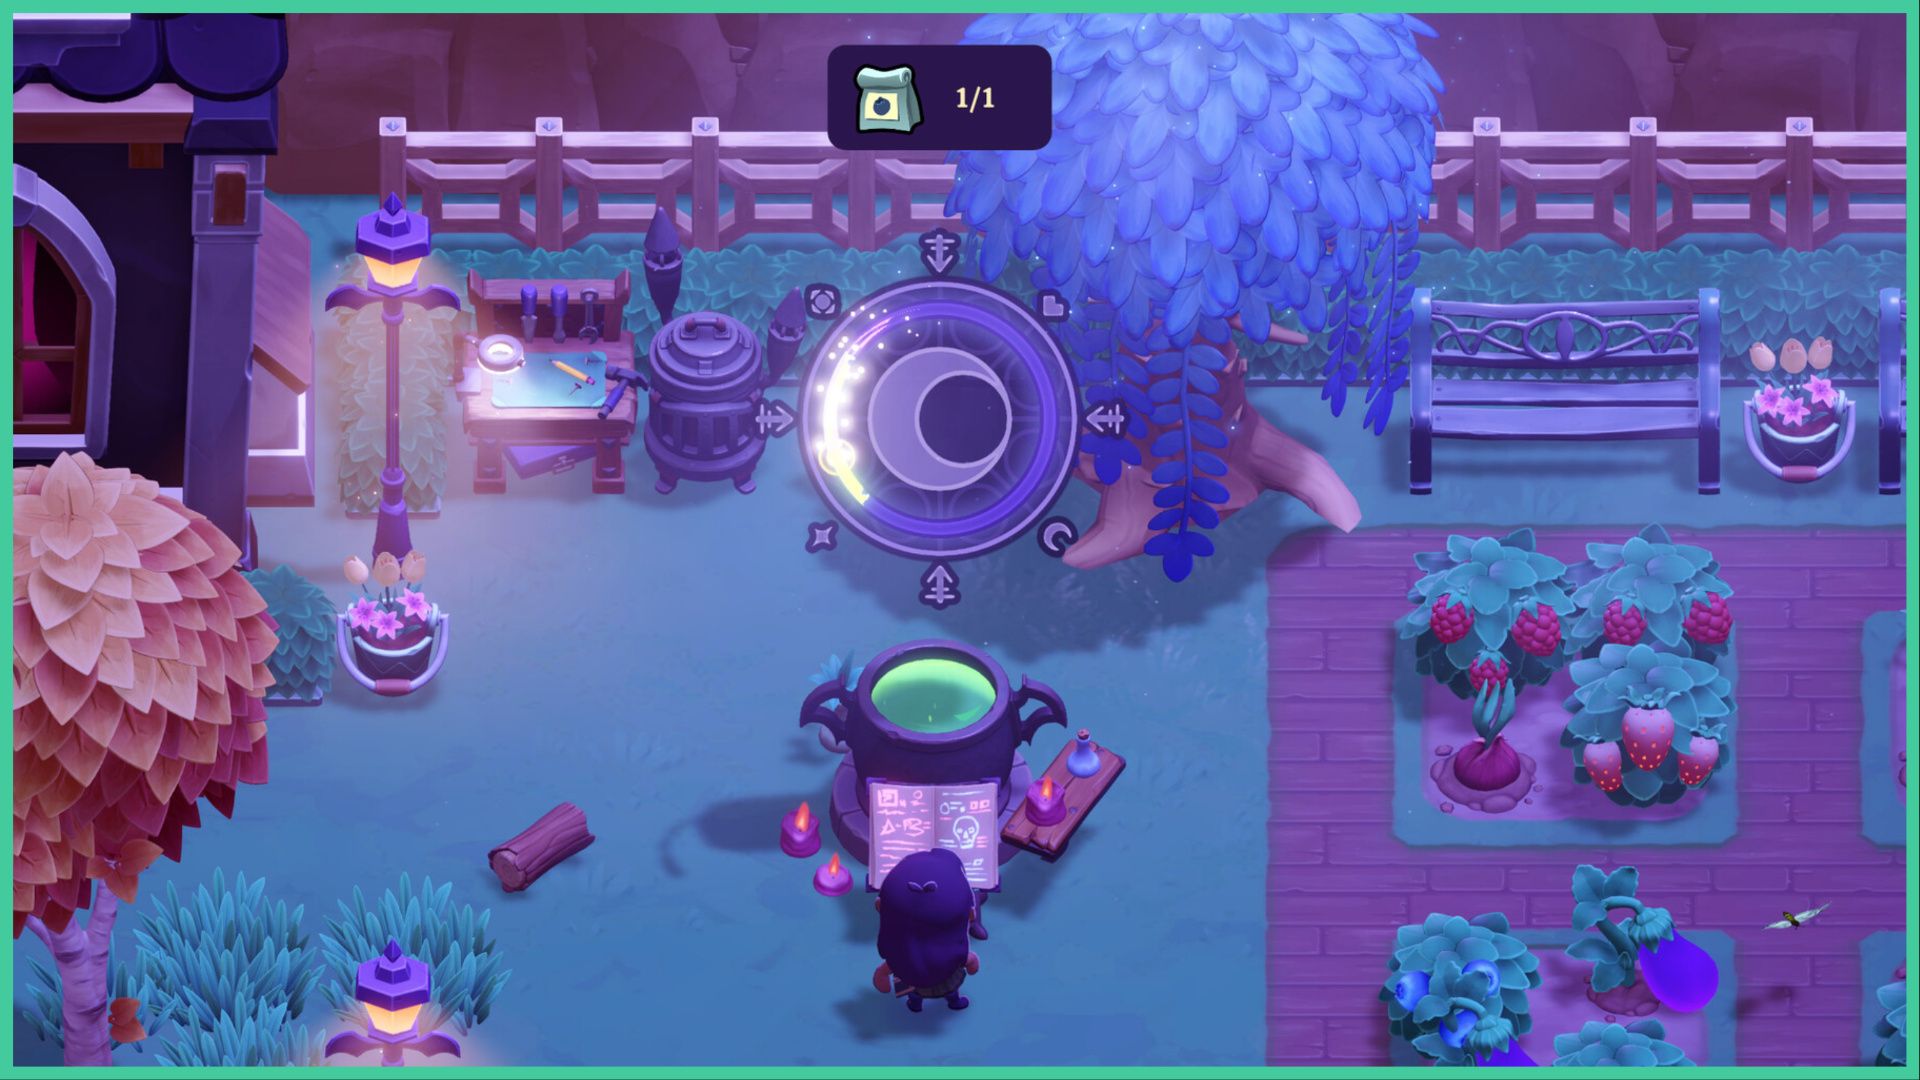 feature image for our moonlight peaks demo news, the image features a promo screenshot of a character standing over a cauldron with a recipe book as they brew up a potion, there is a small farming plot with fruit and veg to the right, and a small crafting table next to a furnace on the left, there is also a streetlamp in the shape of a bat